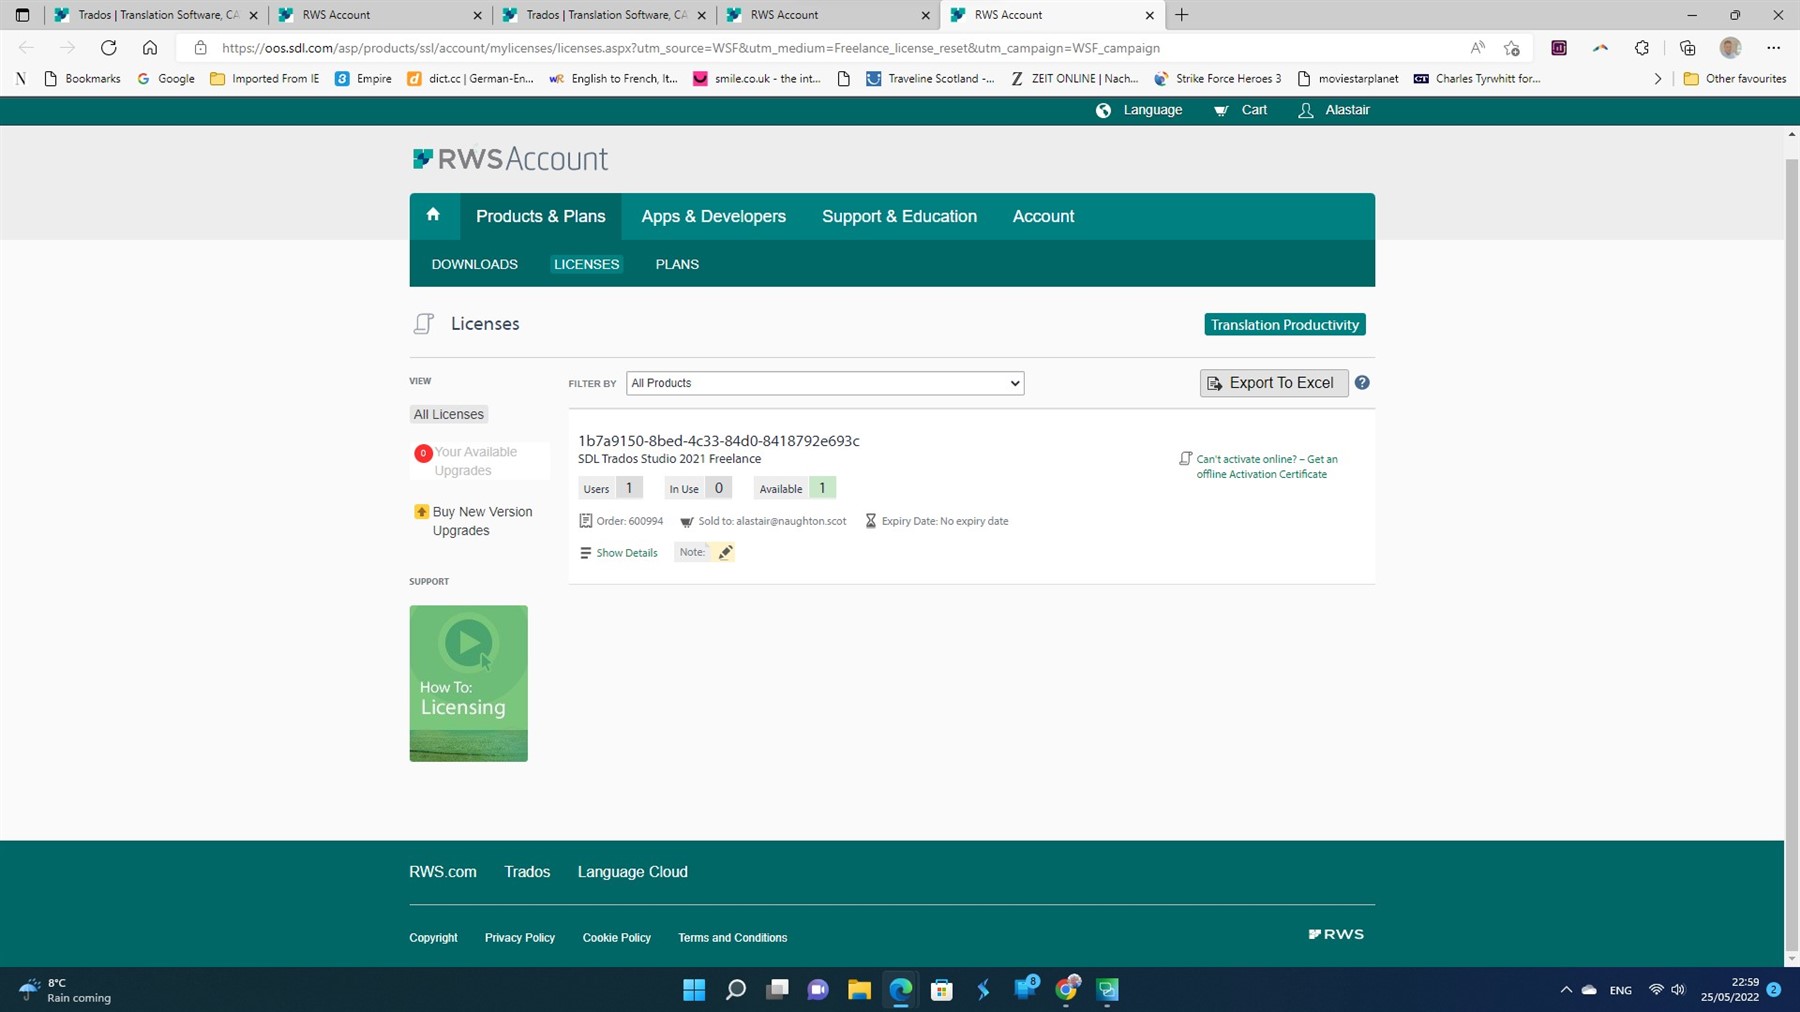 Screenshot of Trados Studio RWS Account Licenses page showing an available upgrade for SDL Trados Studio 2021 Freelance with a note icon and a warning 'Can't activate online? - Get an offline Activation Certificate'.